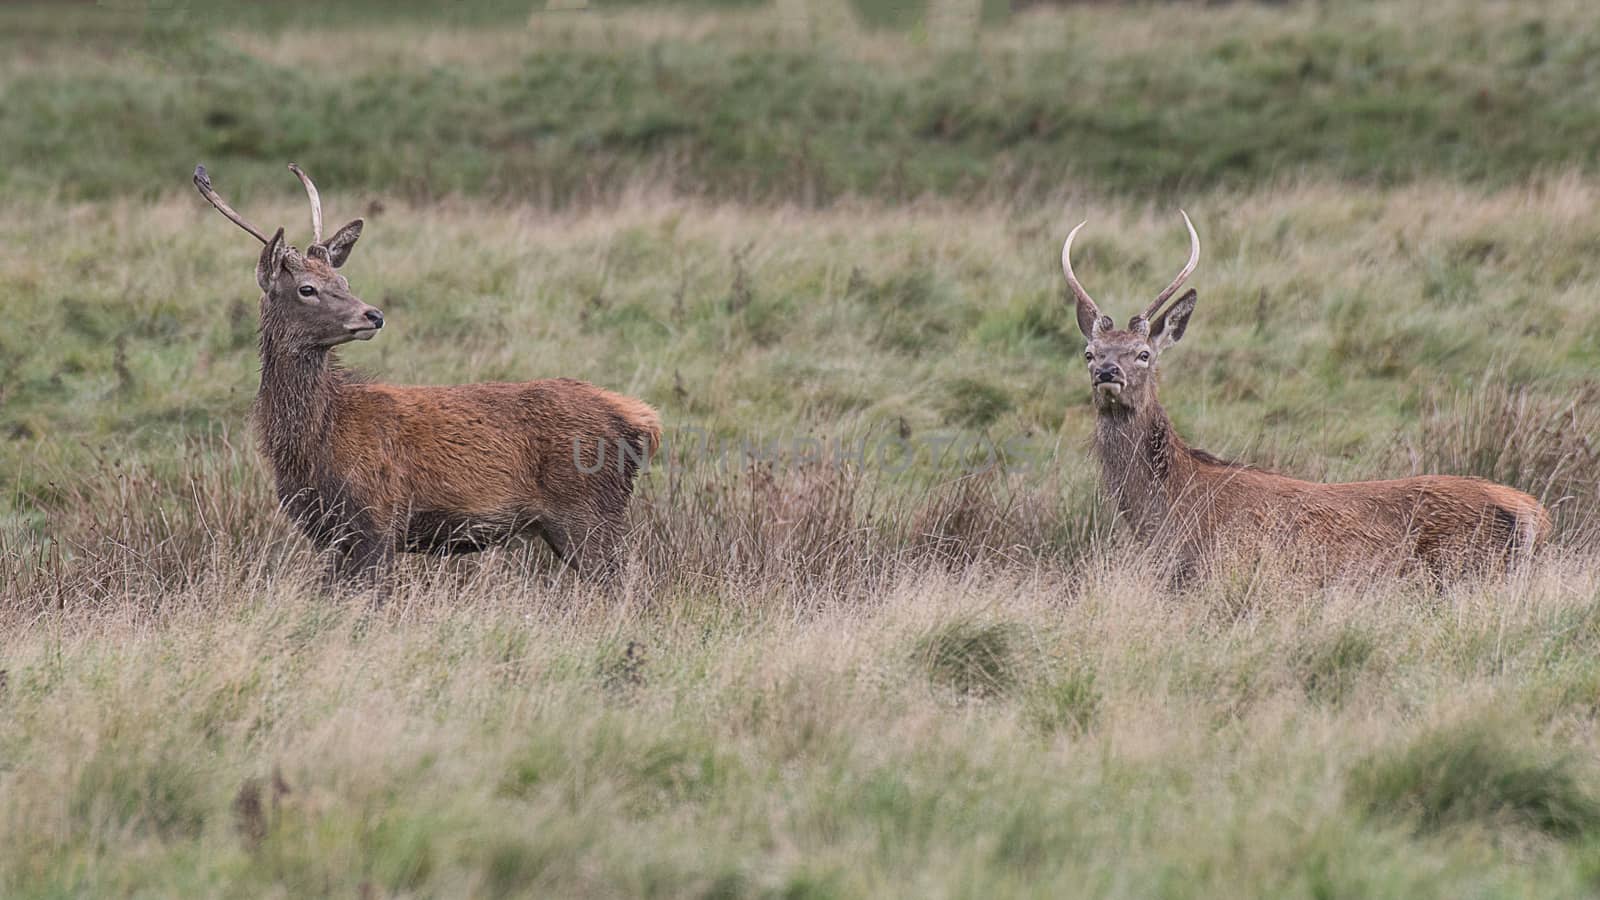 Two young red deer stags standing and looking alert in grassland